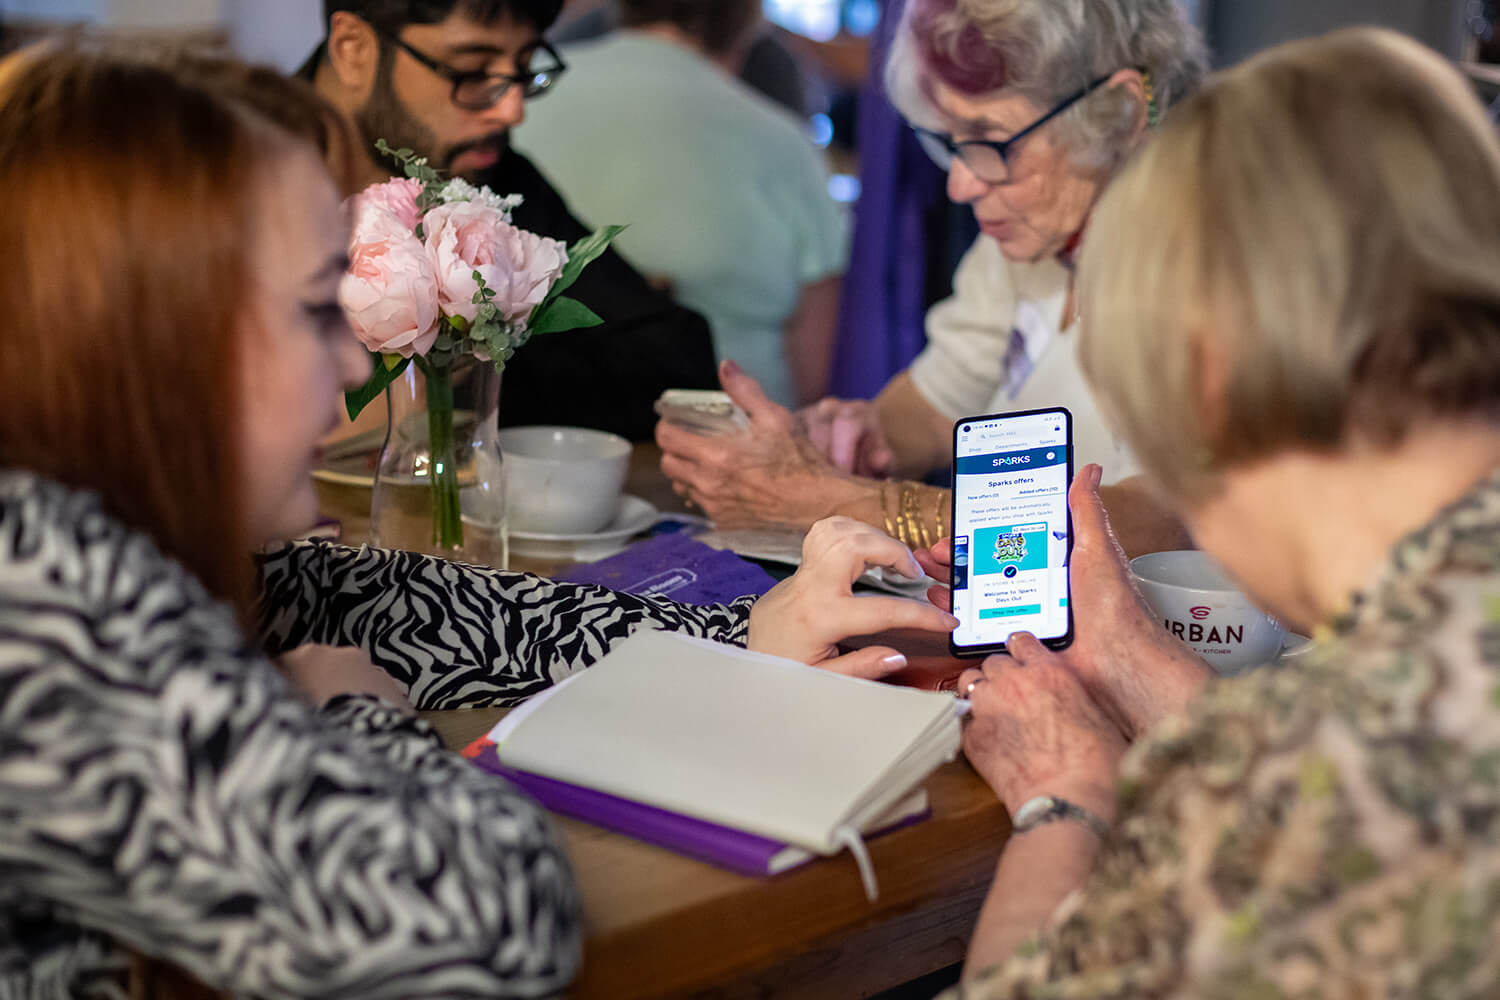 AbilityNet volunteer explaining how to use a smartphone